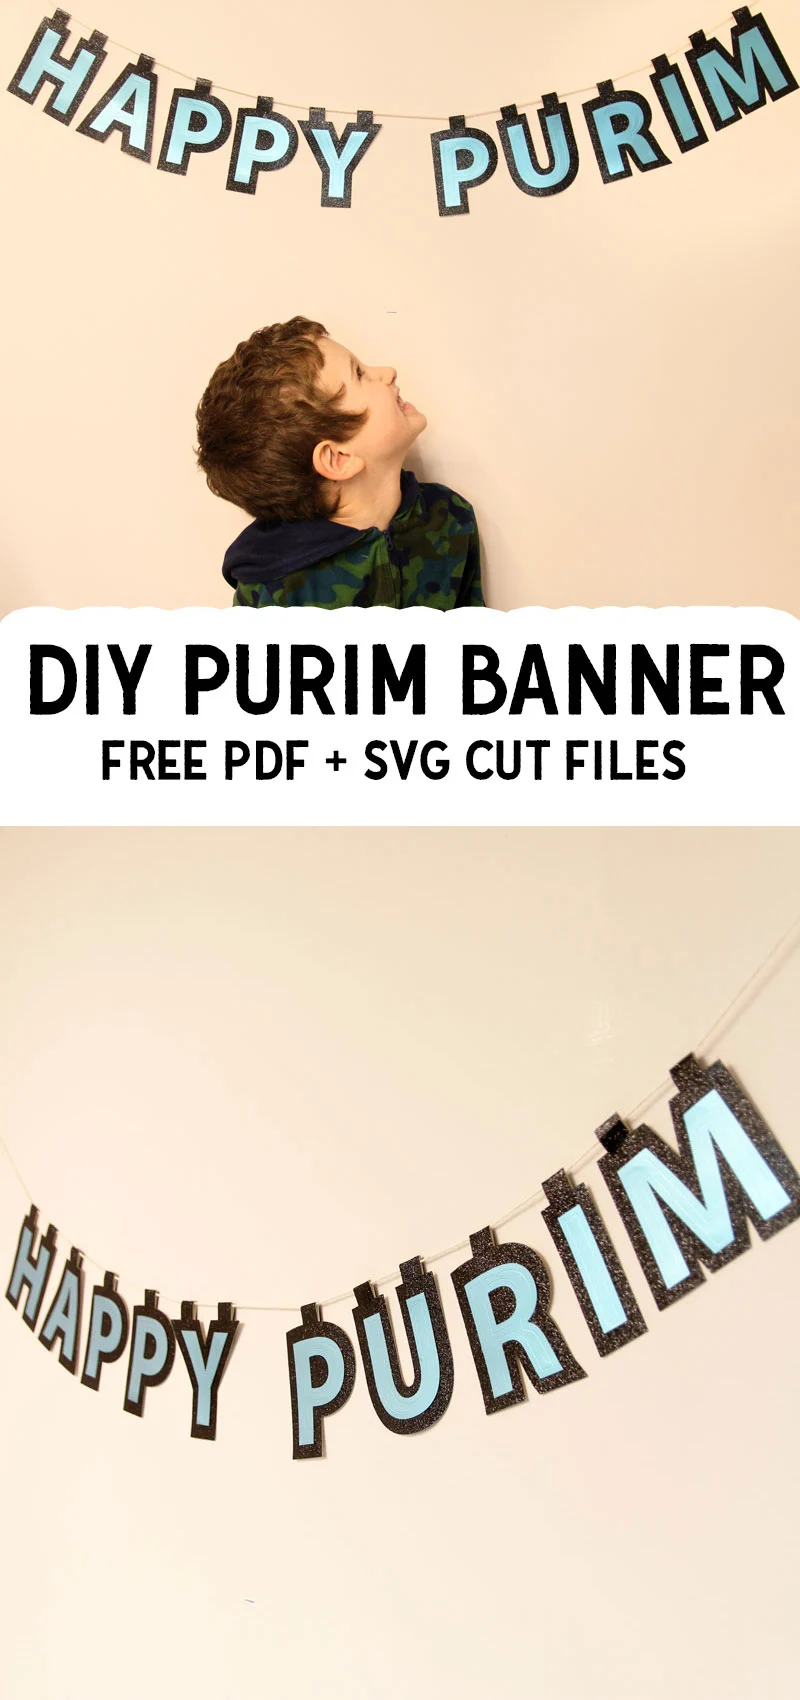 Happy Purim banner collage with young child looking up